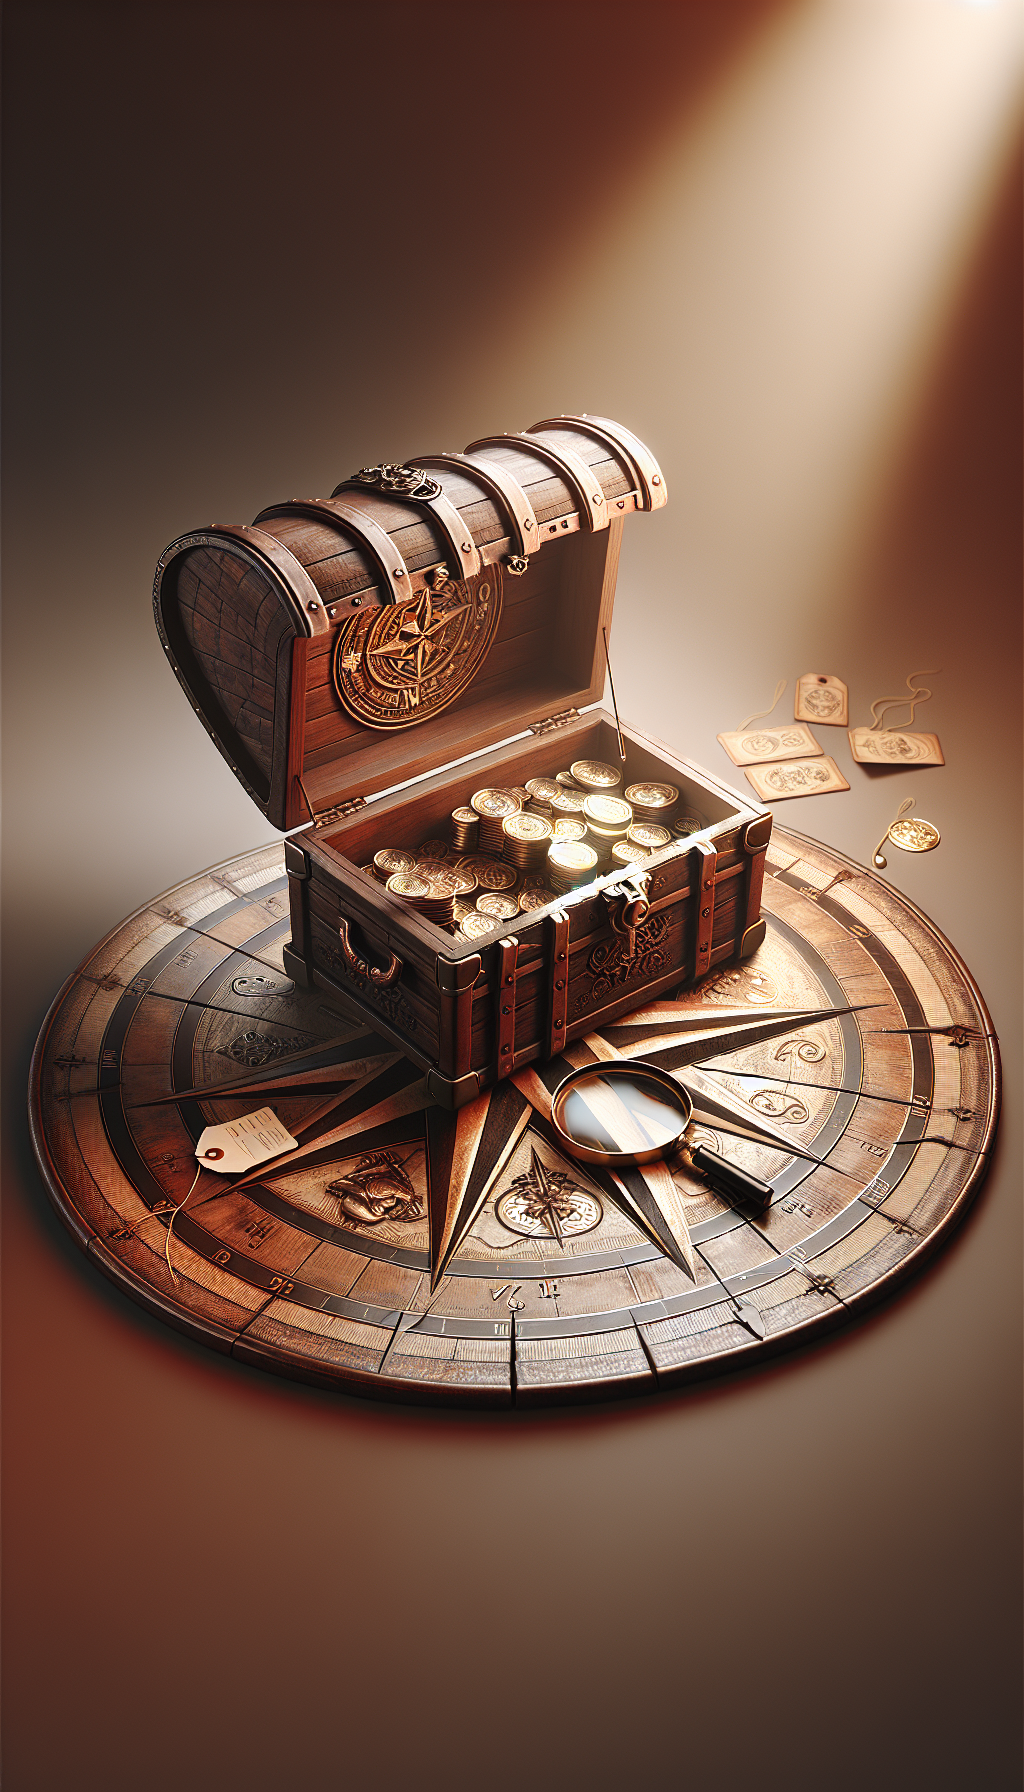 An antique trunk sits atop a vintage, ornately-detailed compass rose, with its lid ajar, revealing glimmering treasures within. Each compass point directs to a different era's emblem, suggesting various trunk origins. A magnifying glass hovers over, symbolizing valuation, and price tags dangle from the handle, hinting at sales. Sketched in sepia tones, the image evokes an air of historic mystique and worth.